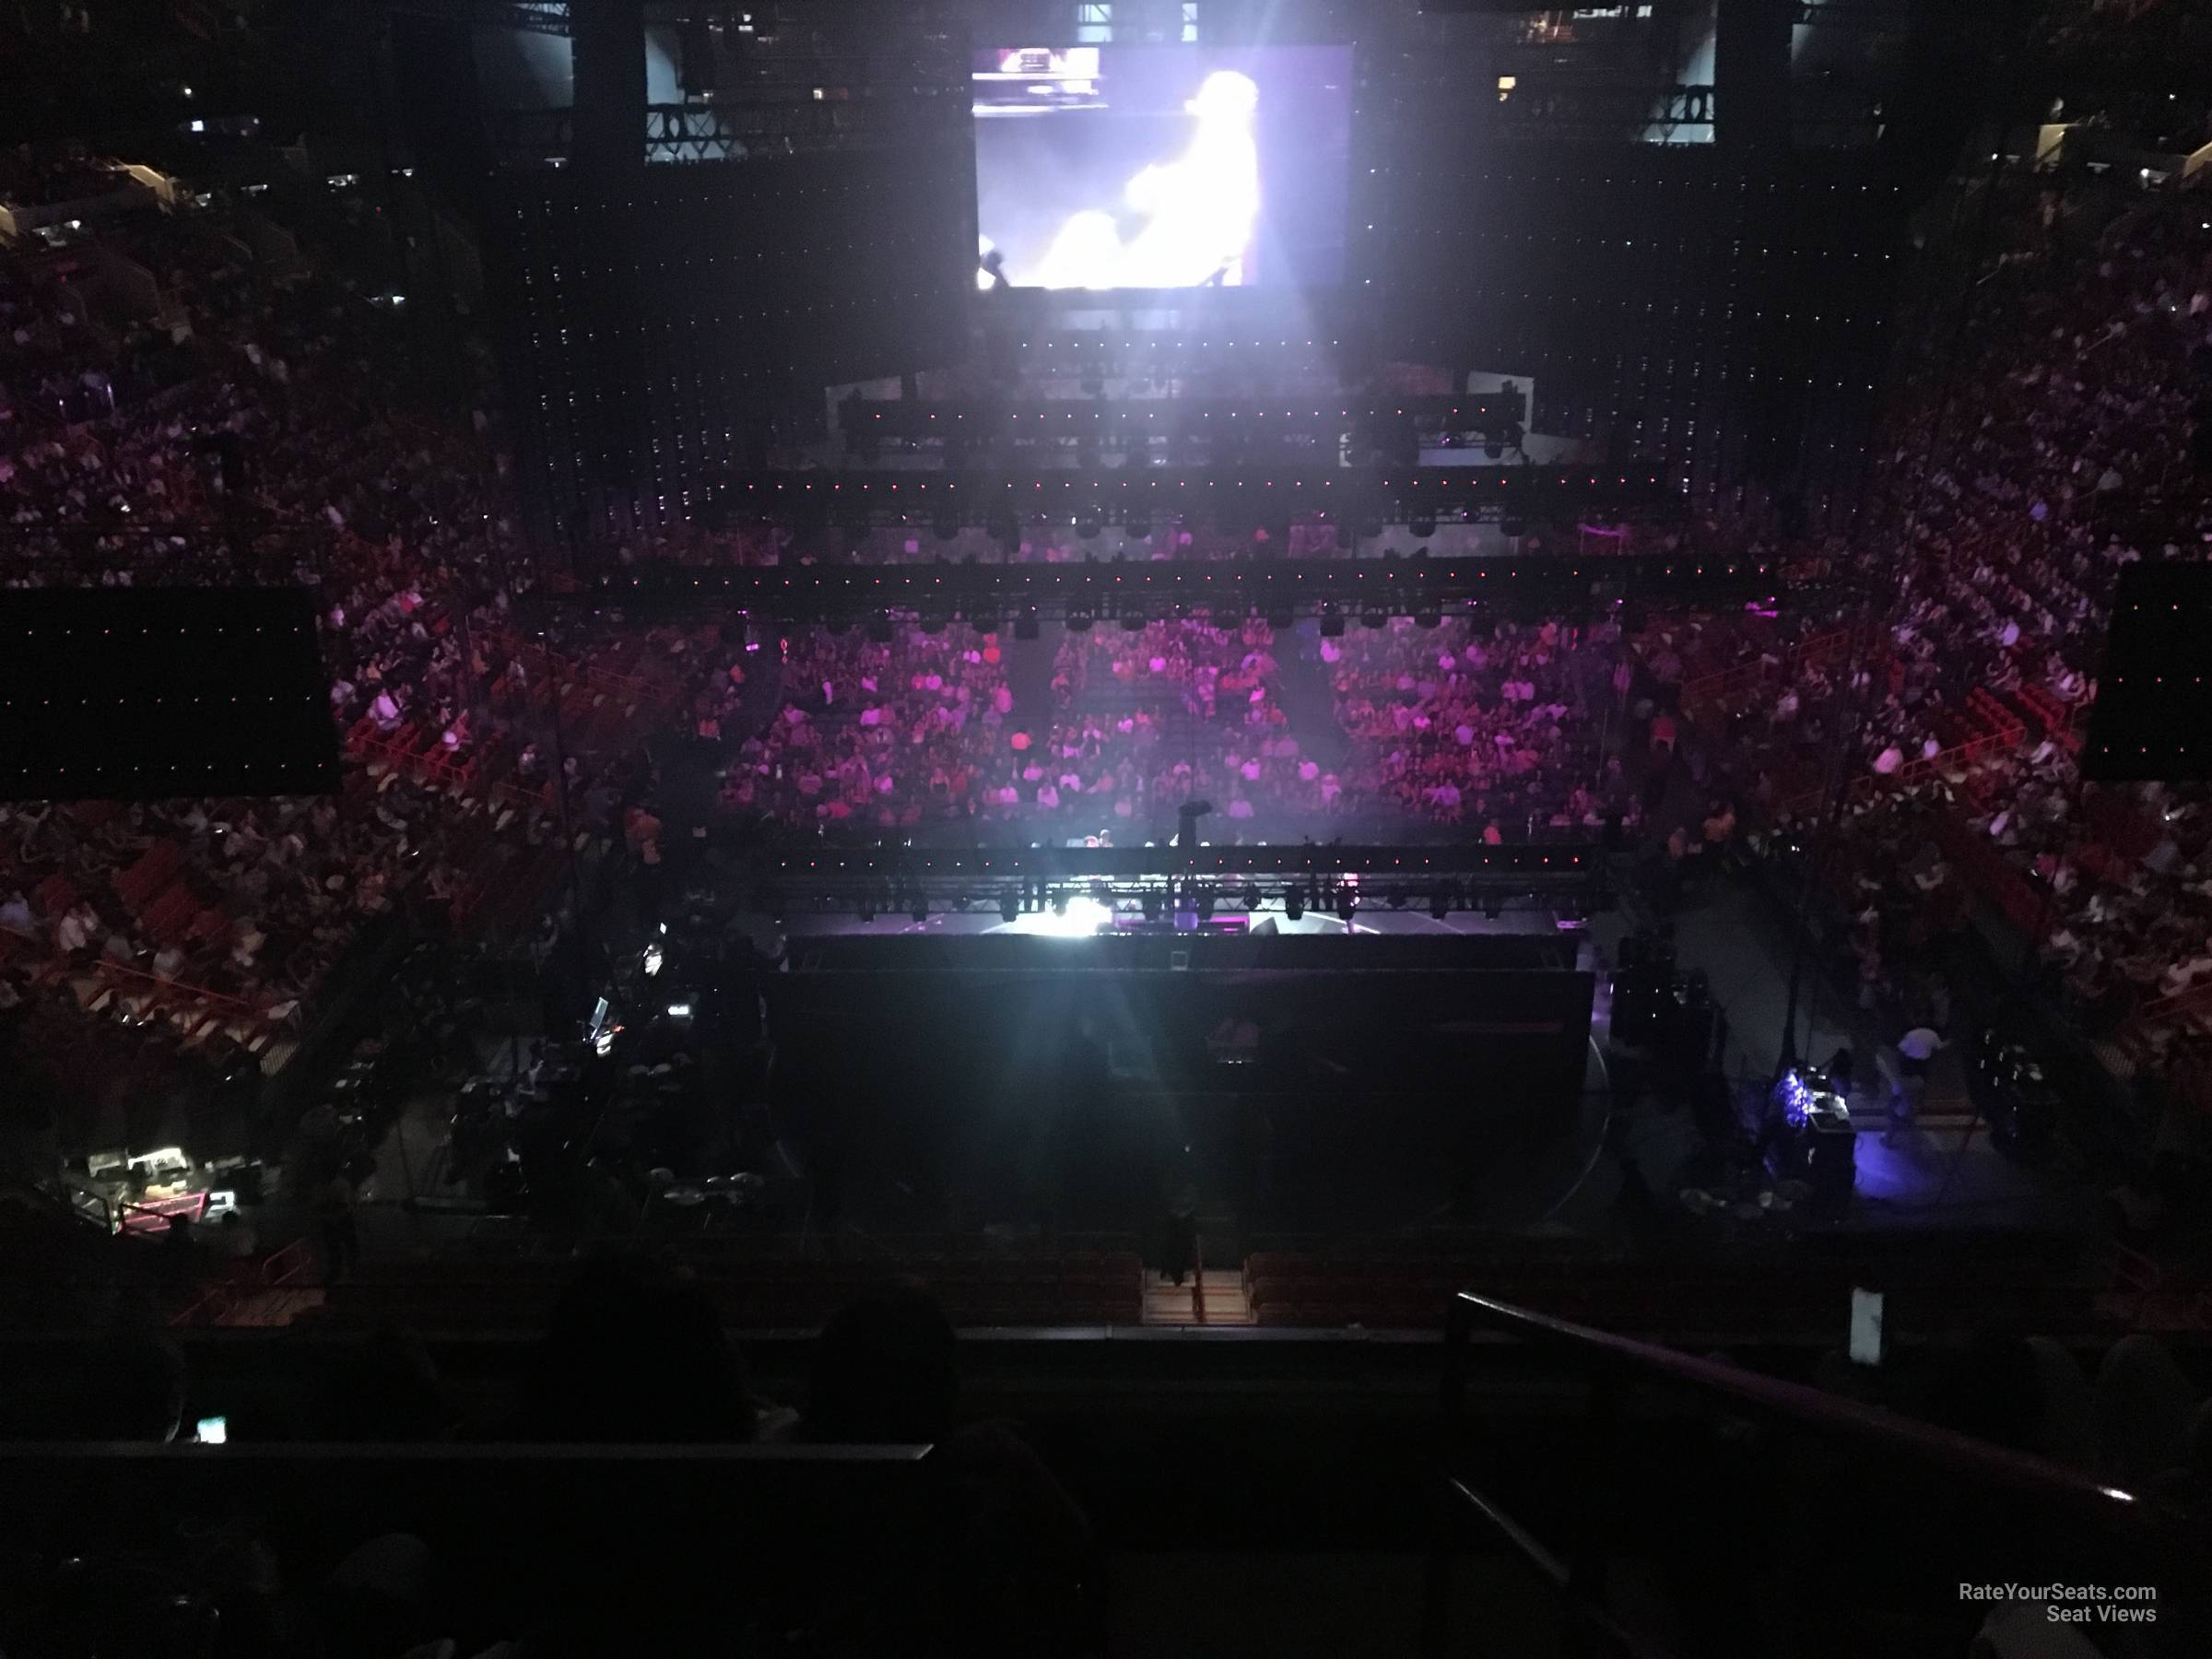 section 332, row 3 seat view  for concert - miami-dade arena